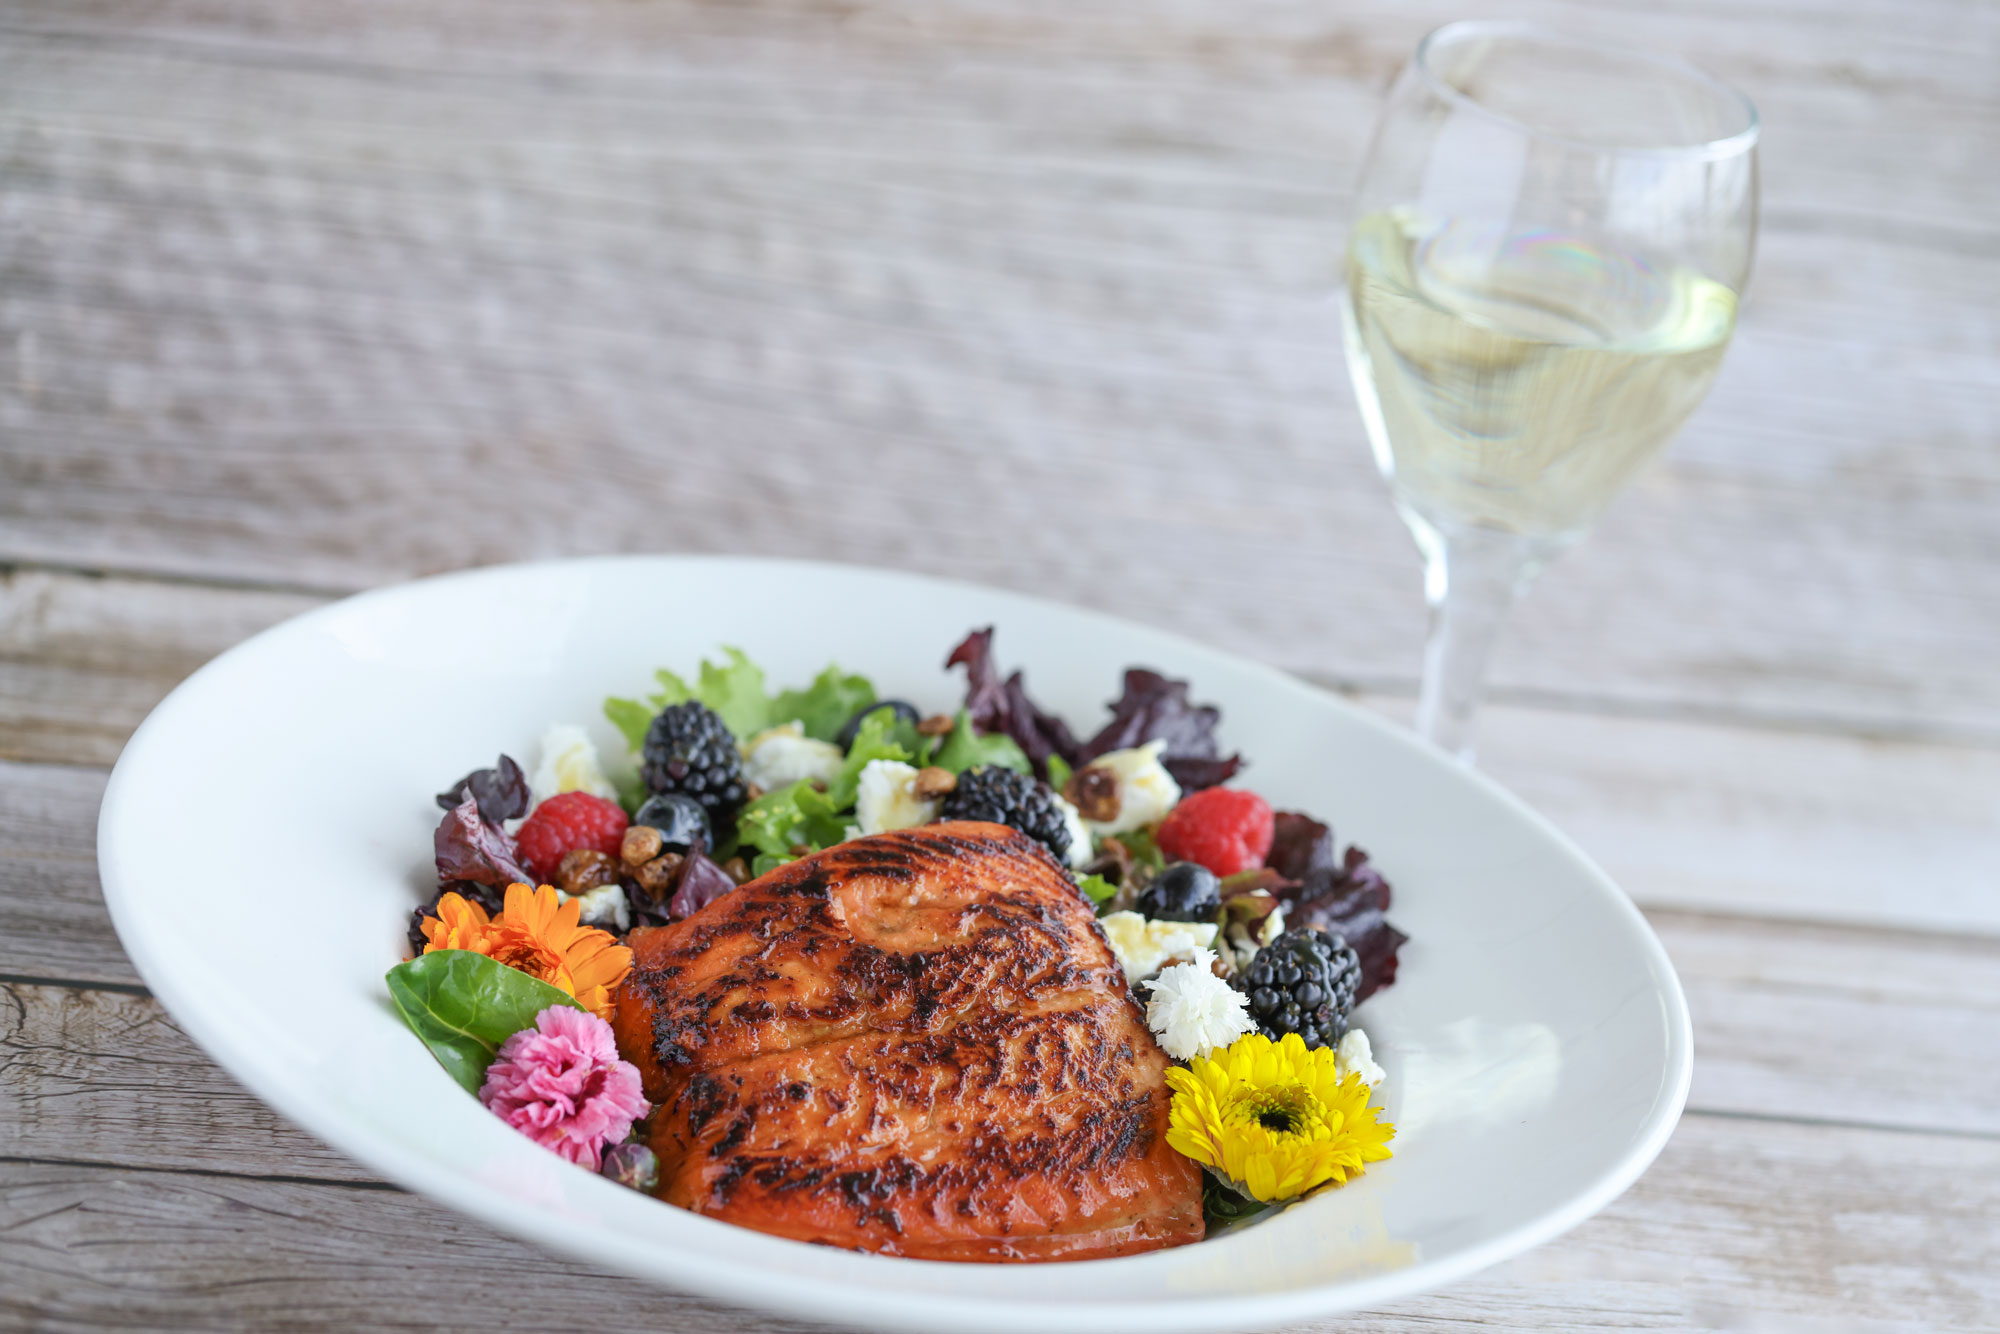 Salty's at the SEA salmon, salad, and white wine